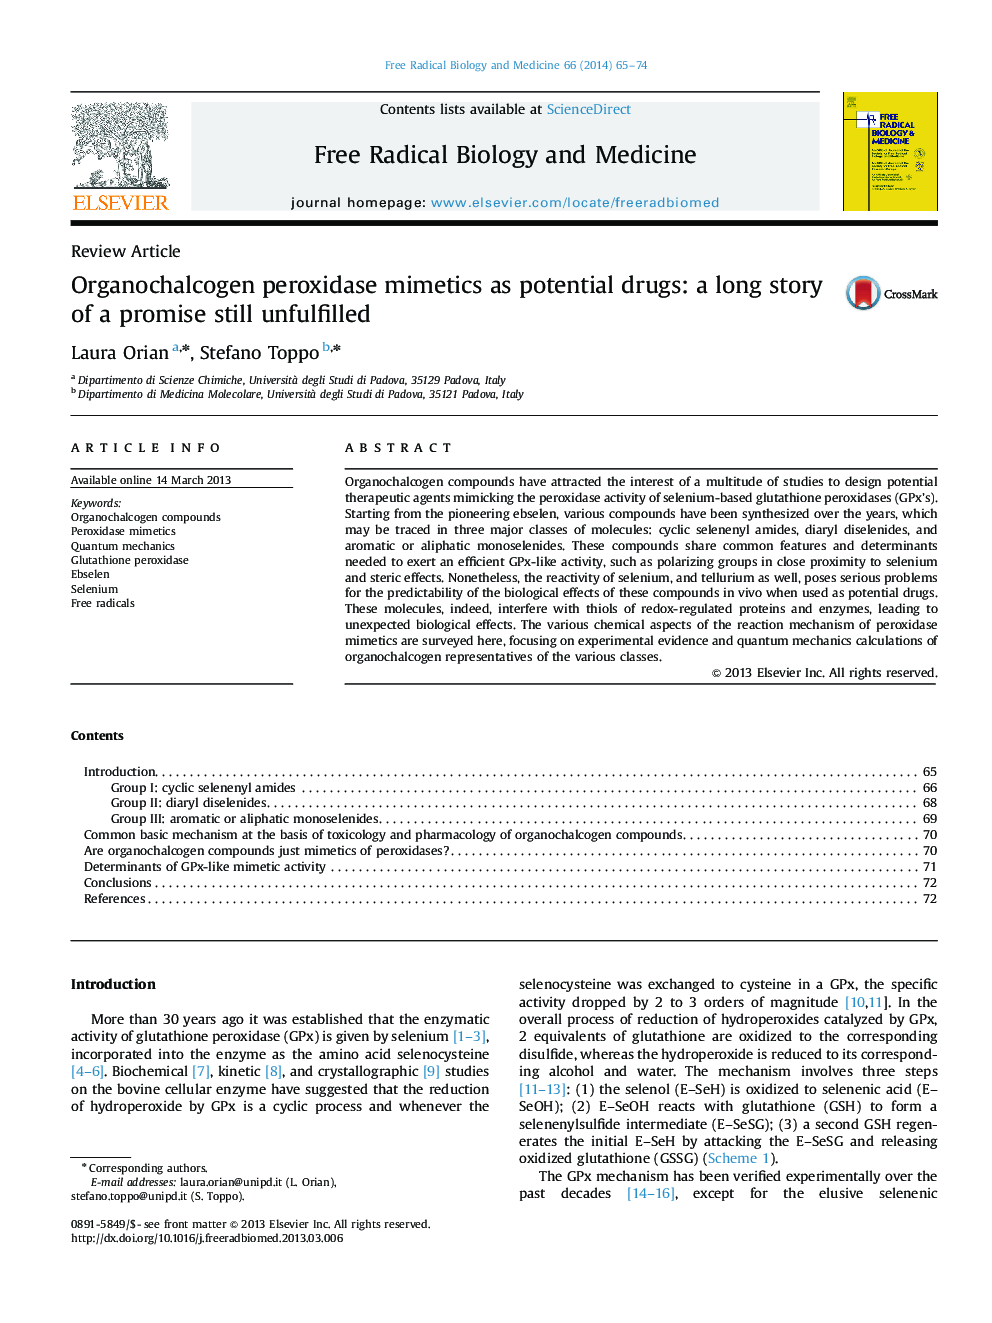 Organochalcogen peroxidase mimetics as potential drugs: a long story of a promise still unfulfilled